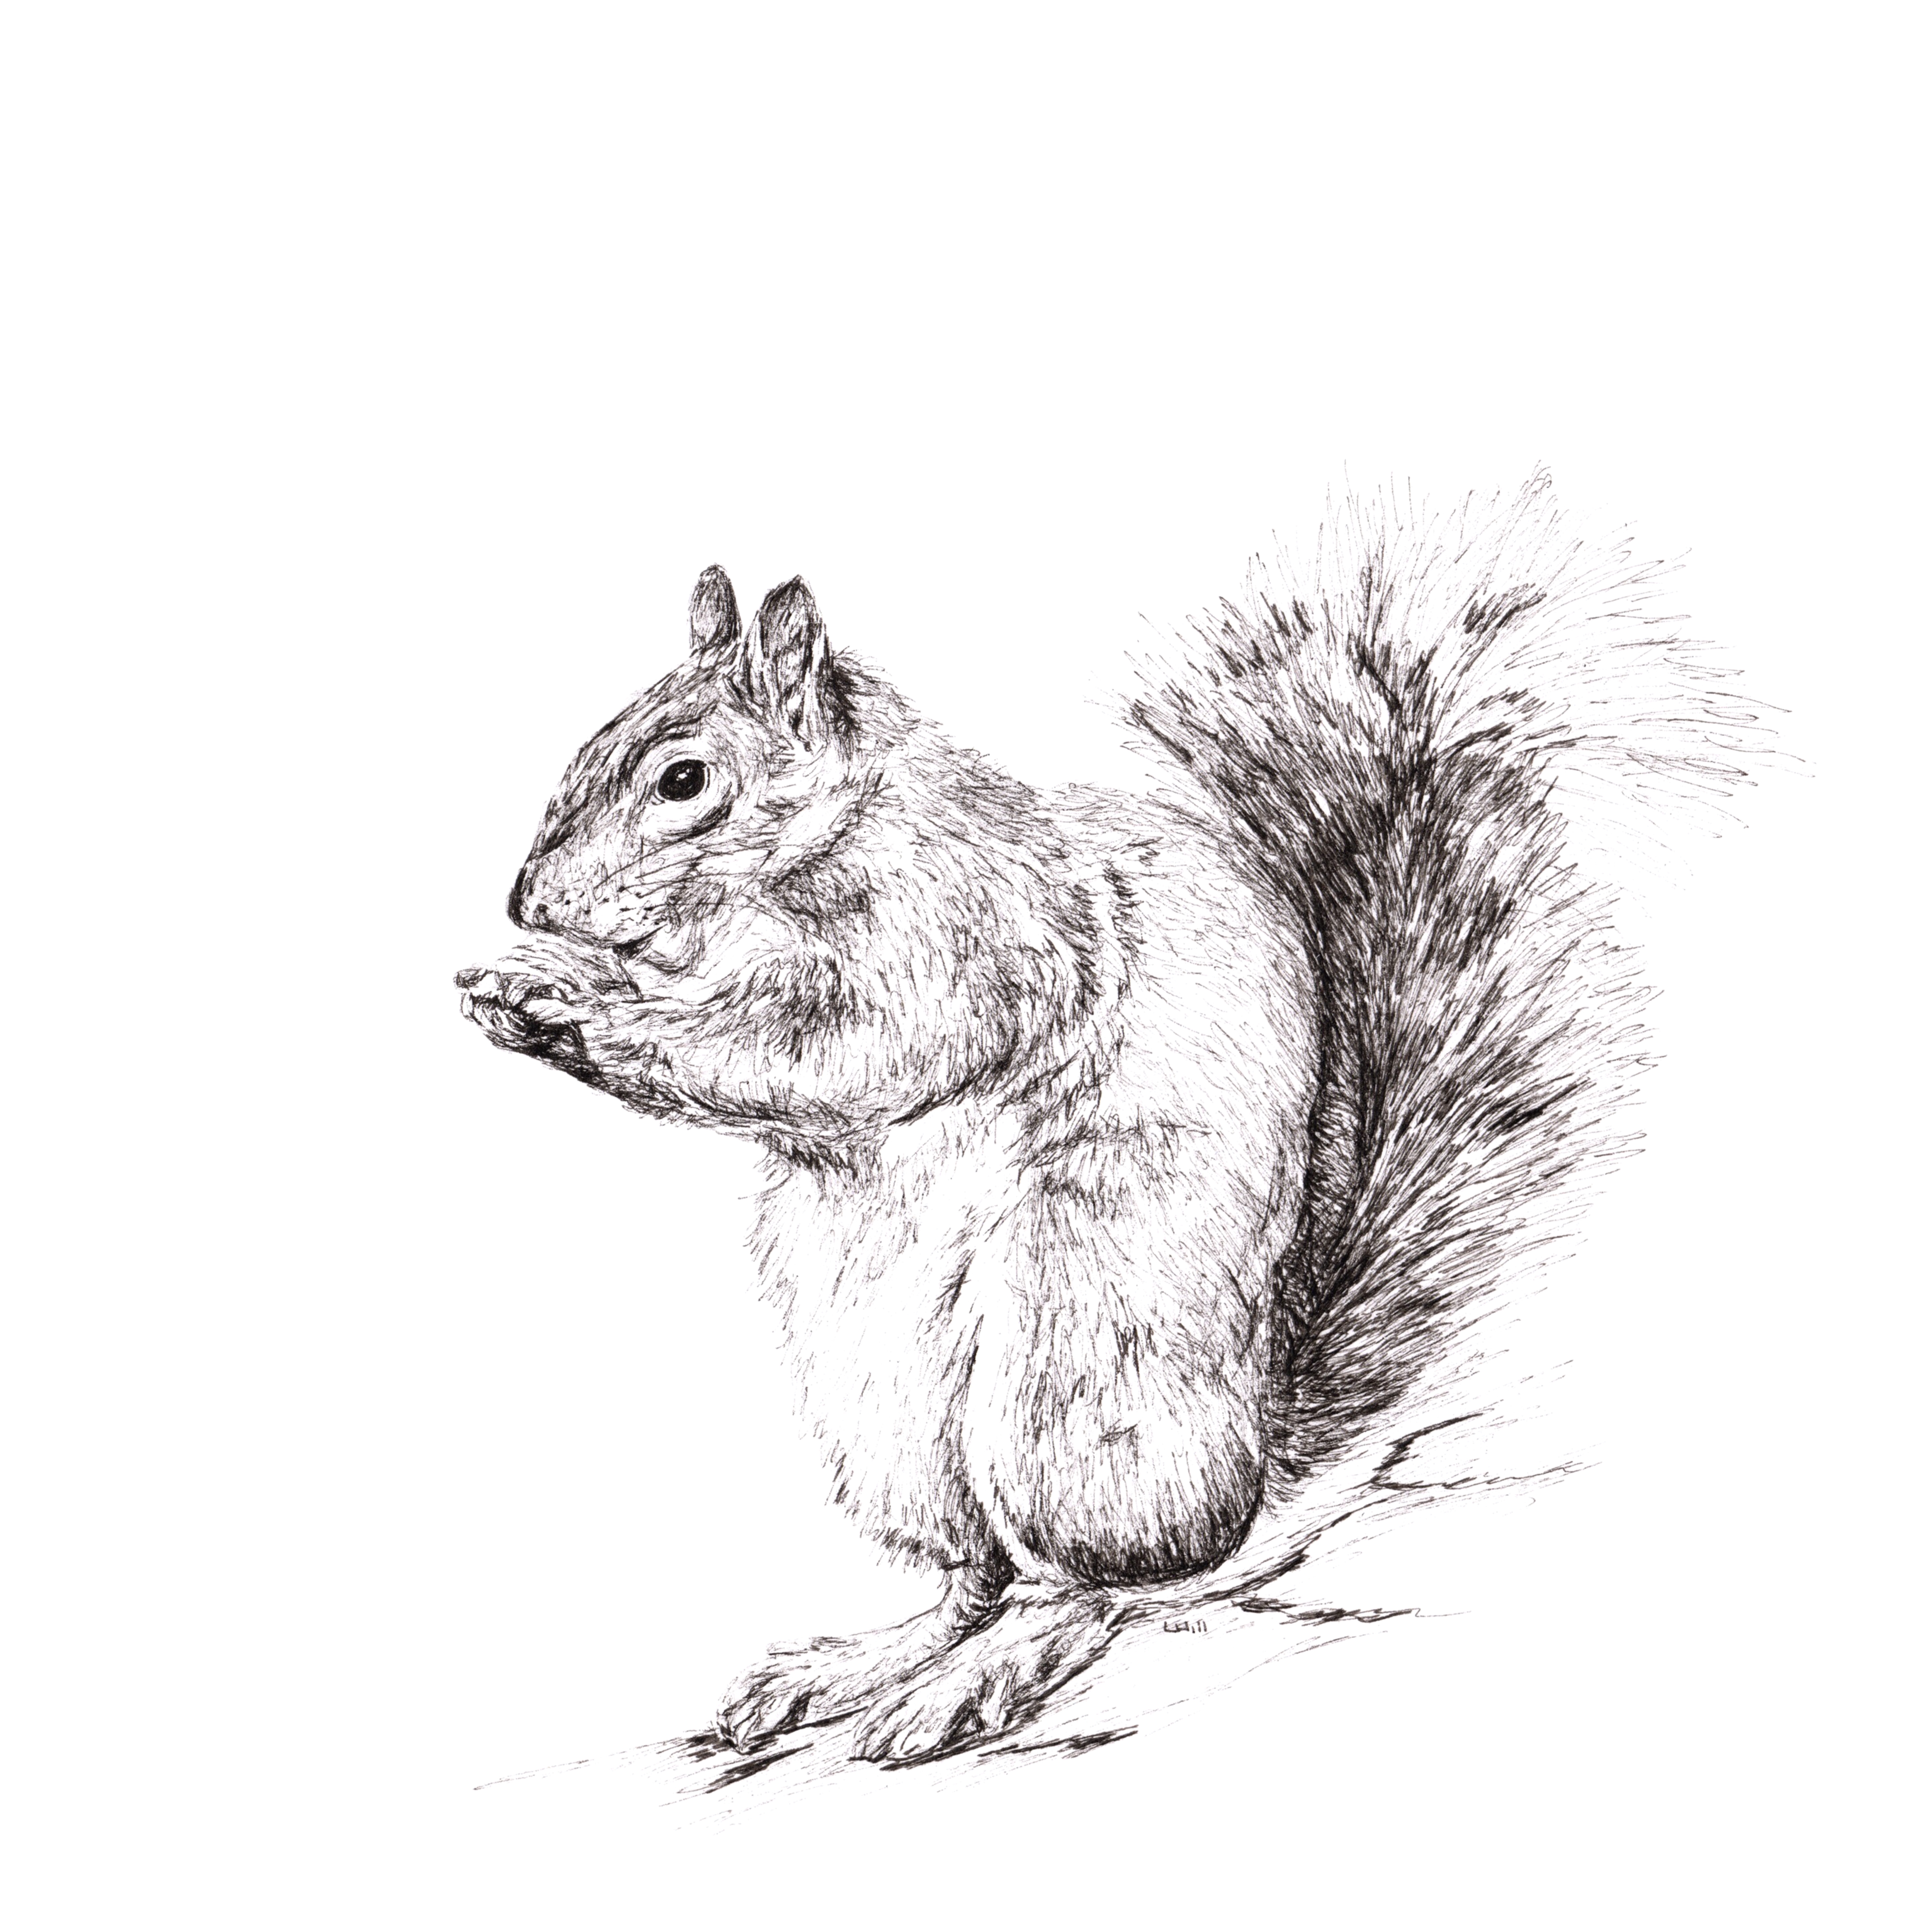 Squirrel pen and ink illustration by Louisa Hill